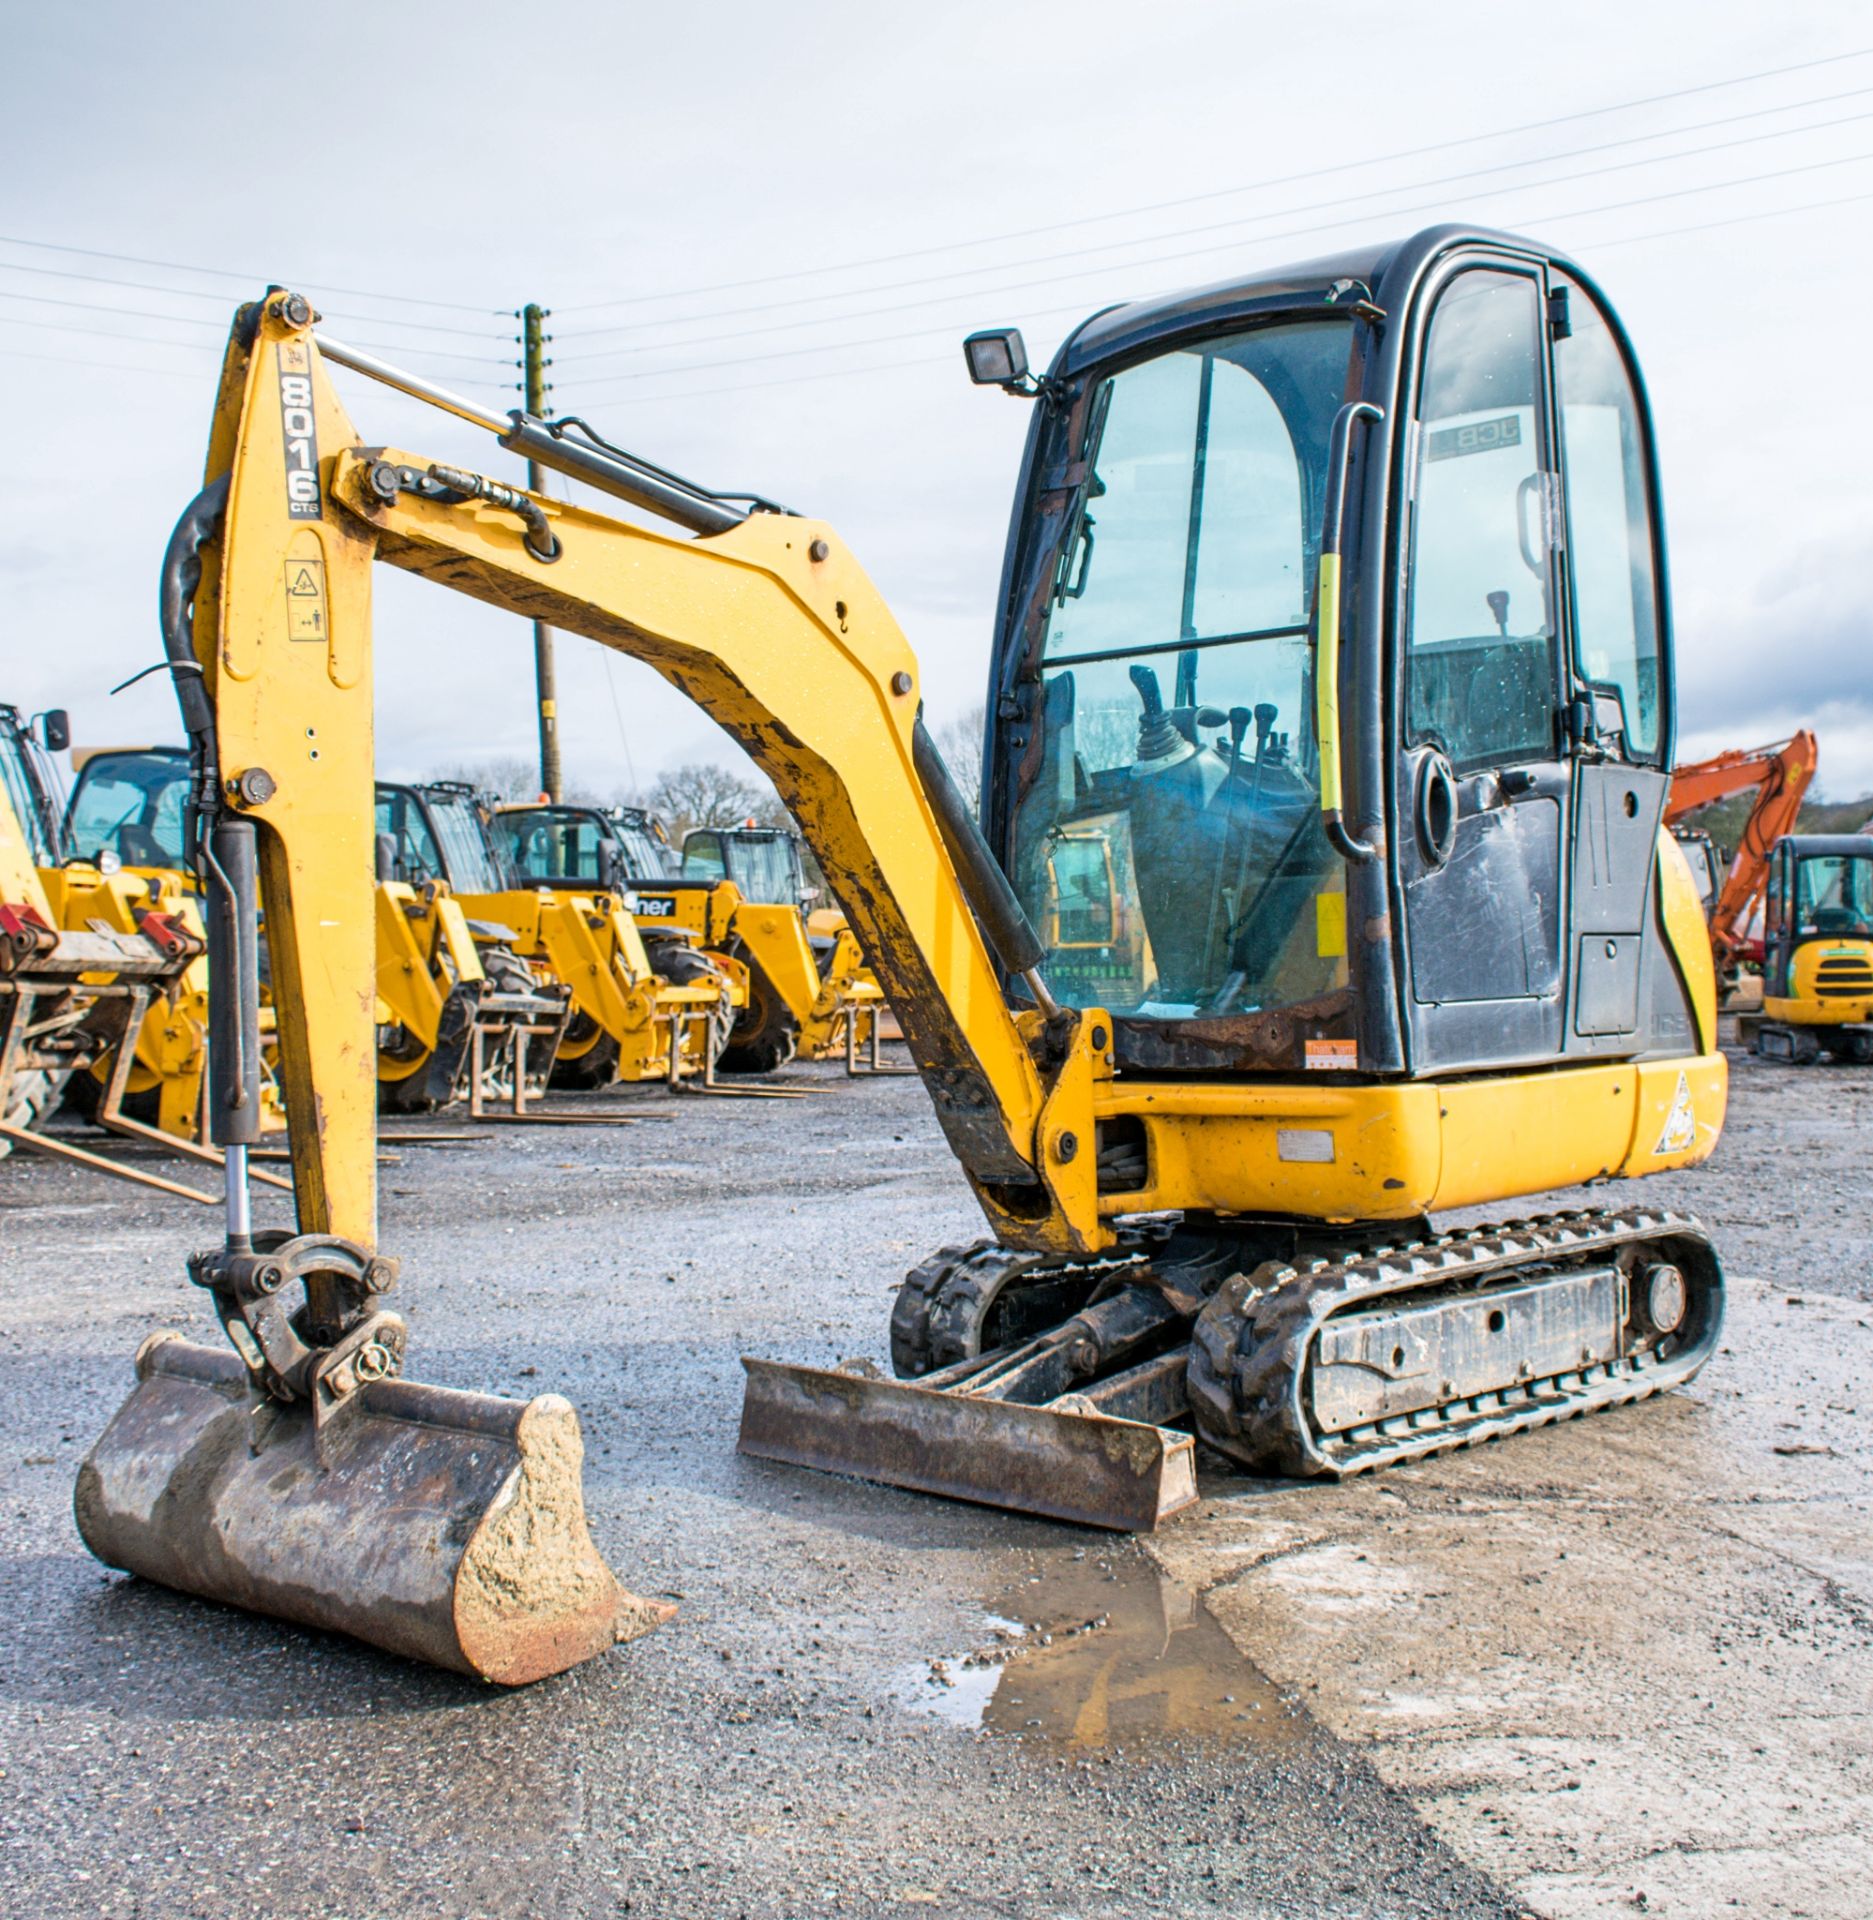 JCB 801.6 CTS 1.5 tonne rubber tracked mini excavator Year: 2013 S/N: 20171431 Recorded Hours: